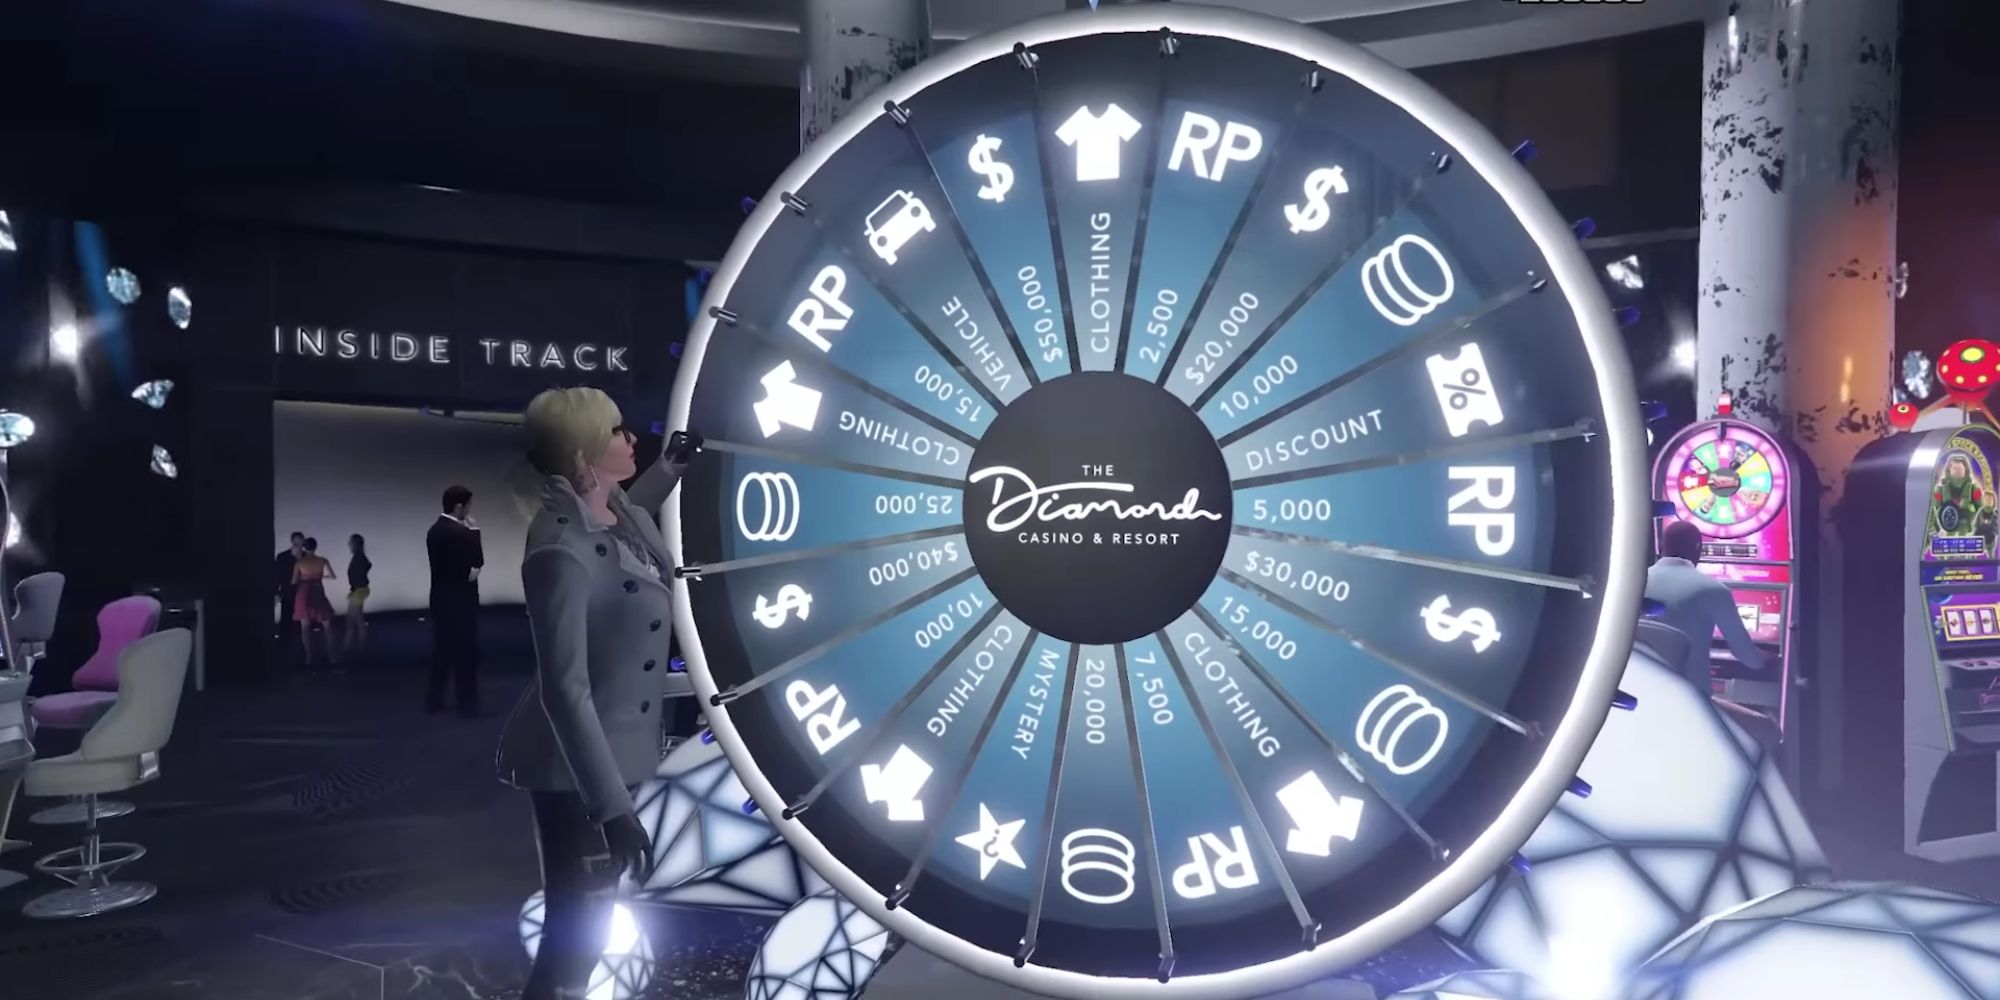 A player using the casino prize wheel in GTA online 